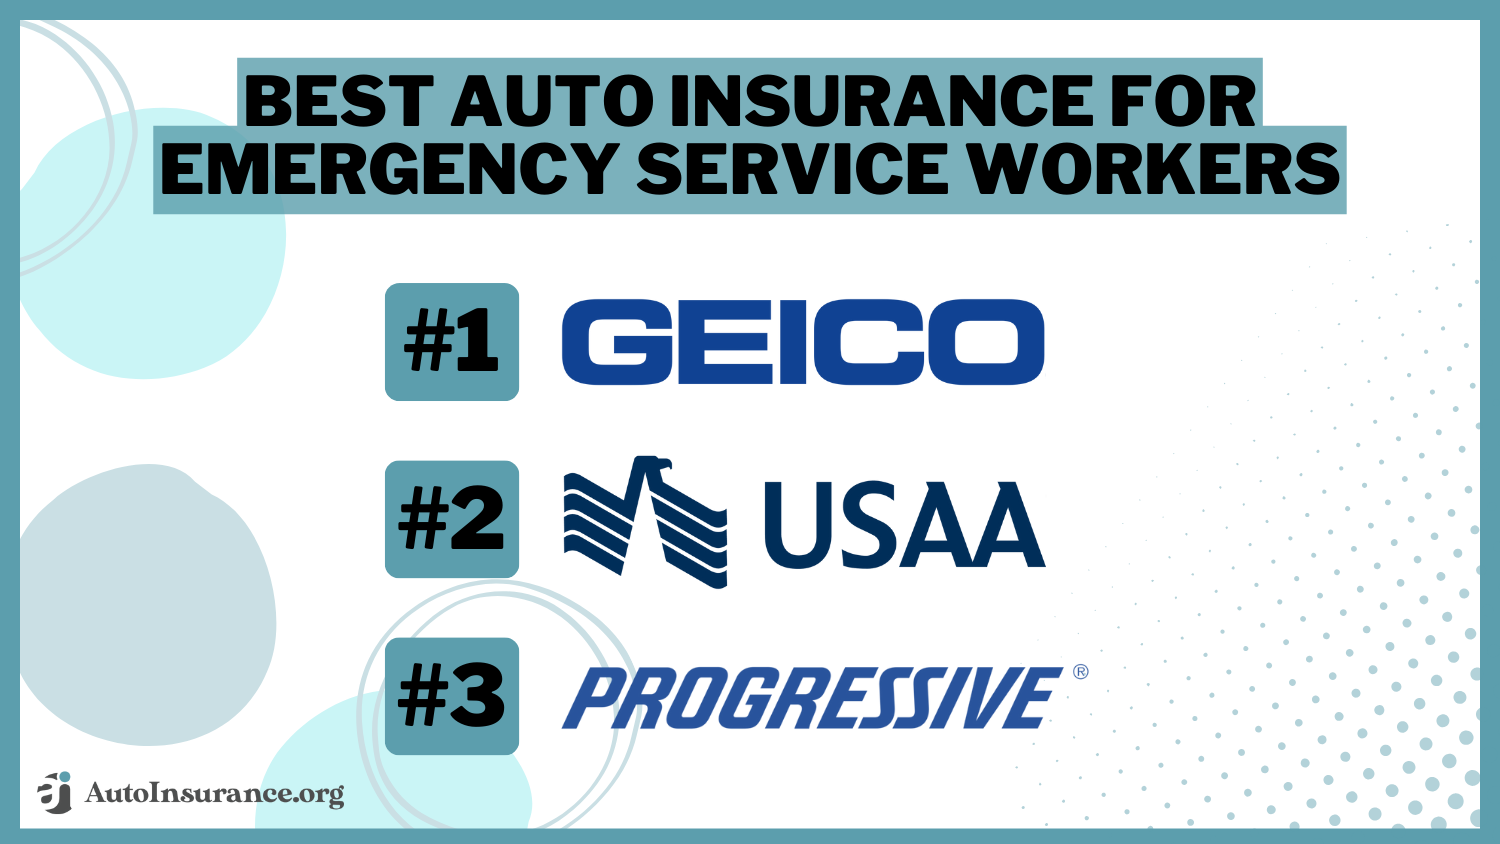 Best Auto Insurance for Emergency Service Workers: Geico, USAA, Progressive